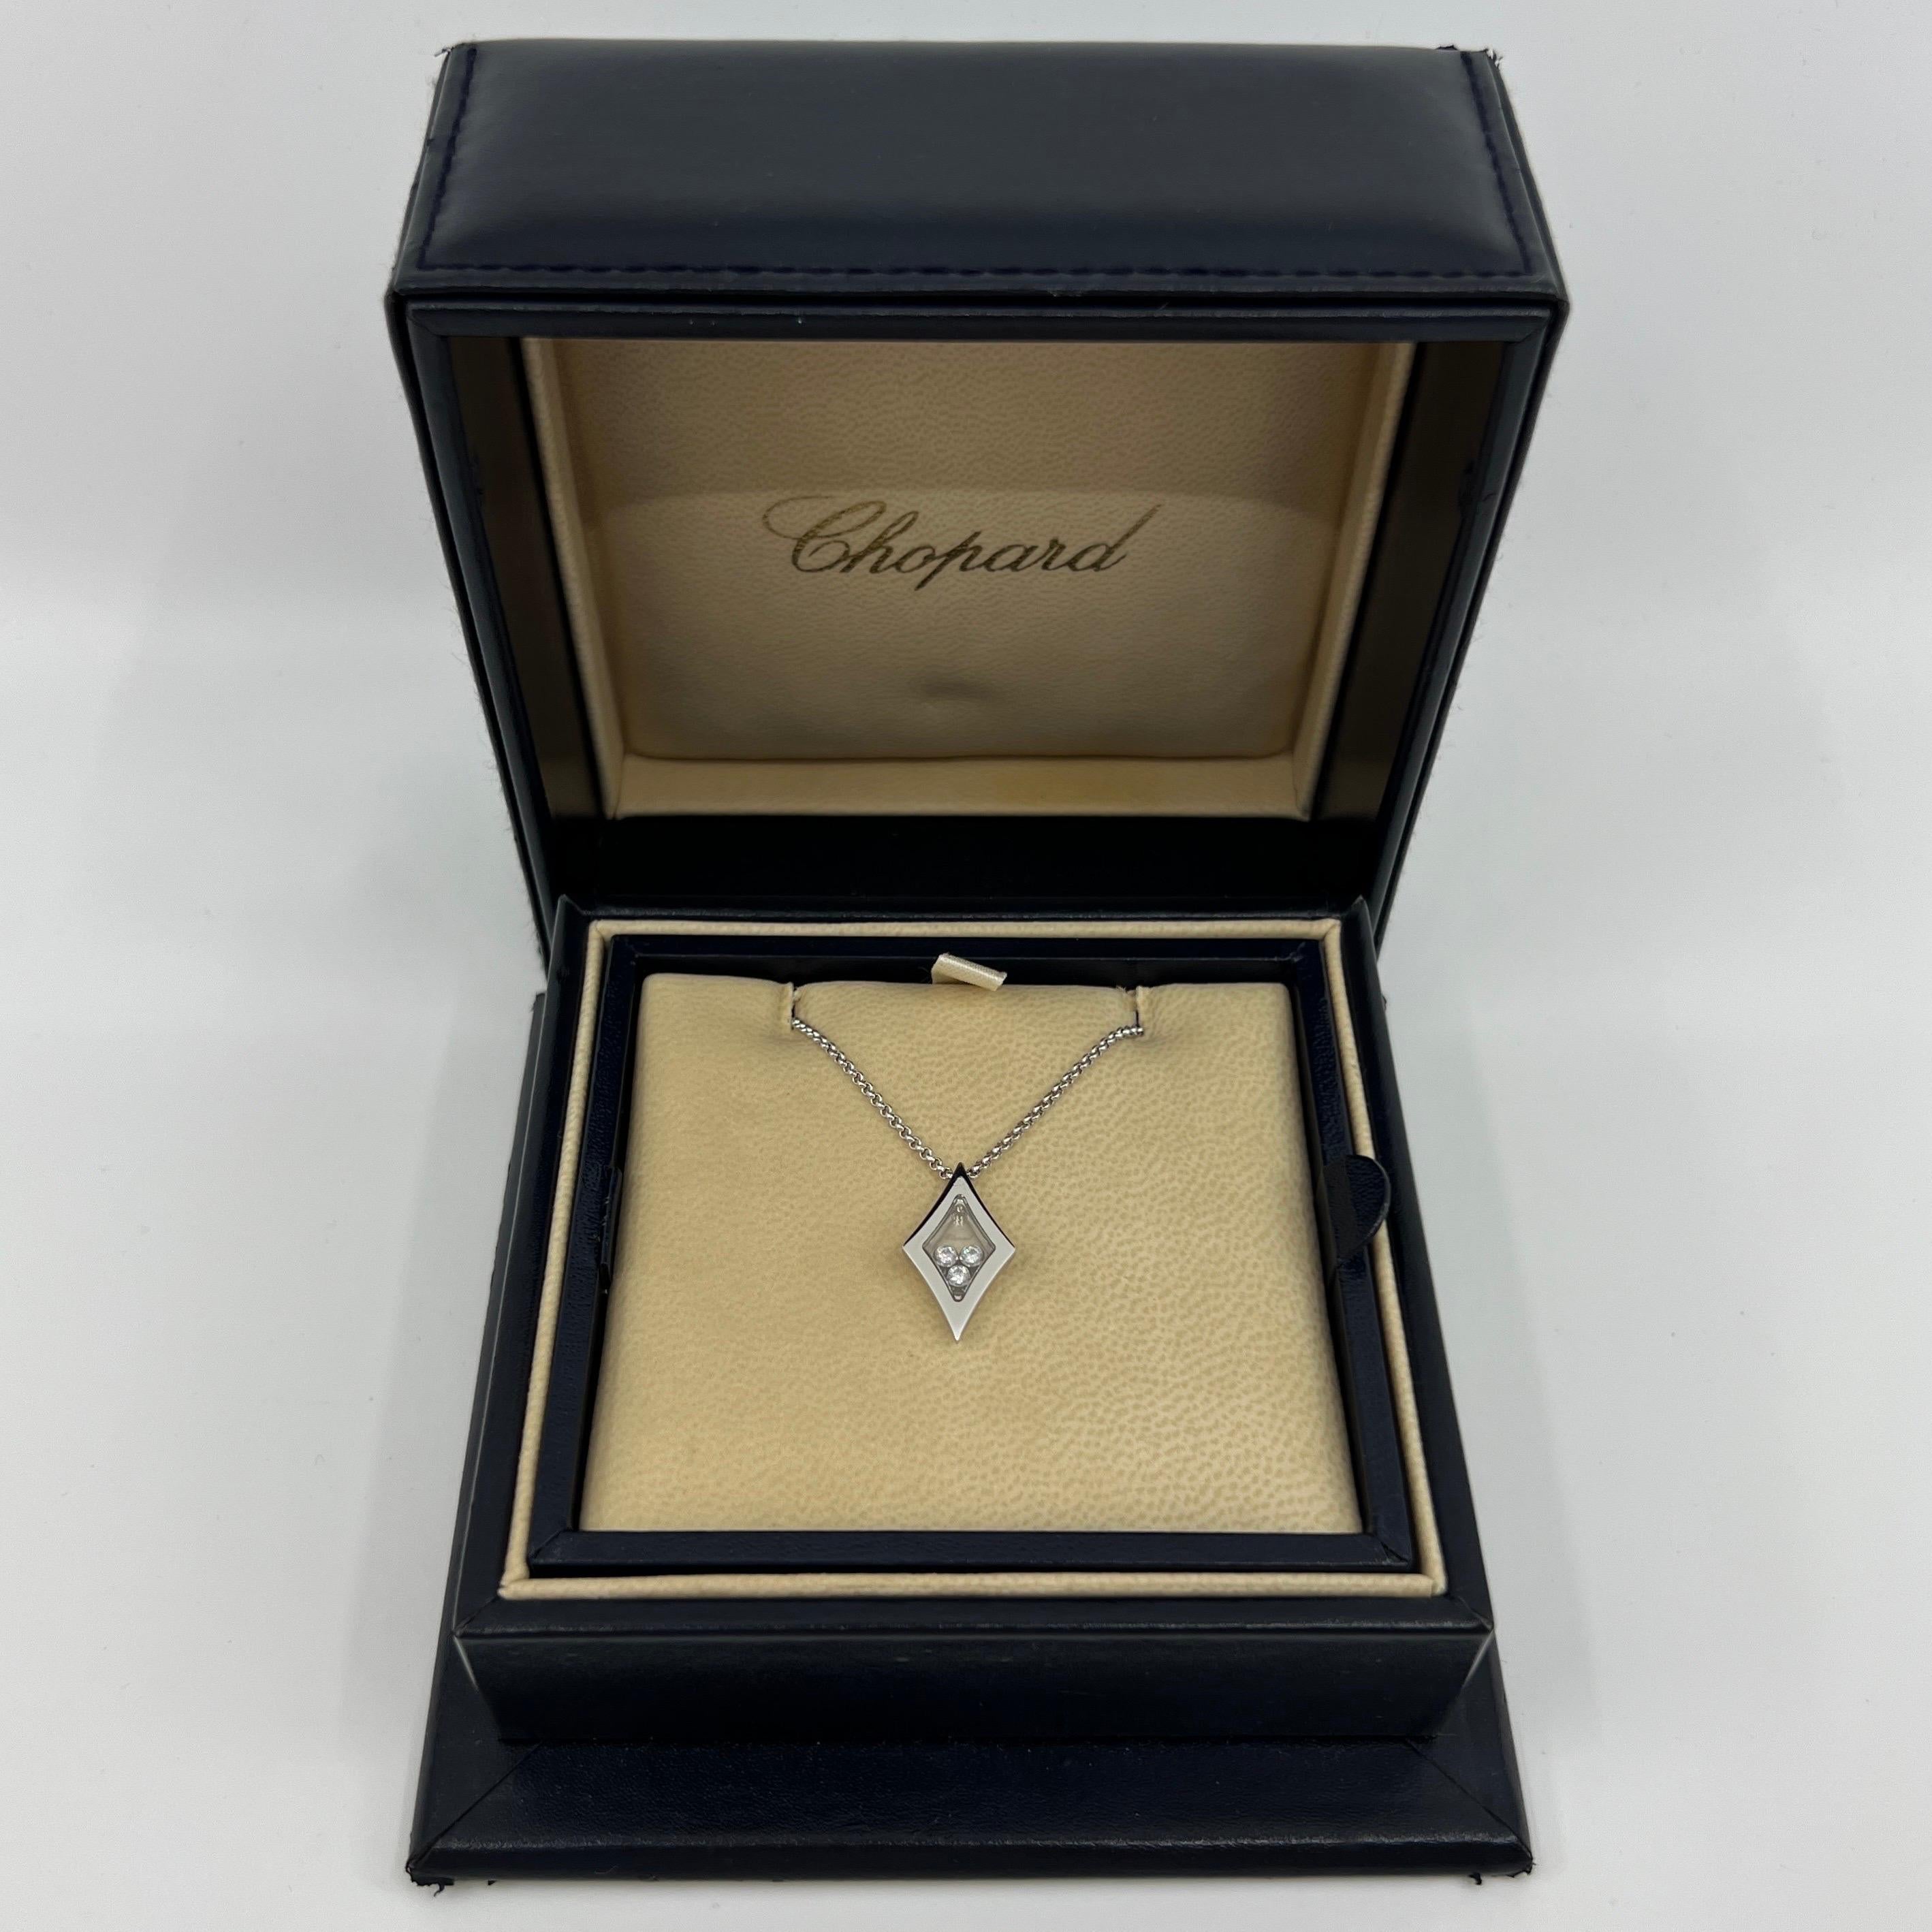 A Rare Chopard Happy Diamonds 18k White Gold Rhombus Pendant Necklace.

Inspired by drops of water, Chopard's Happy Diamonds Icons collection features diamonds that are free to swirl gracefully behind sapphire crystal glass, enhancing their sparkle